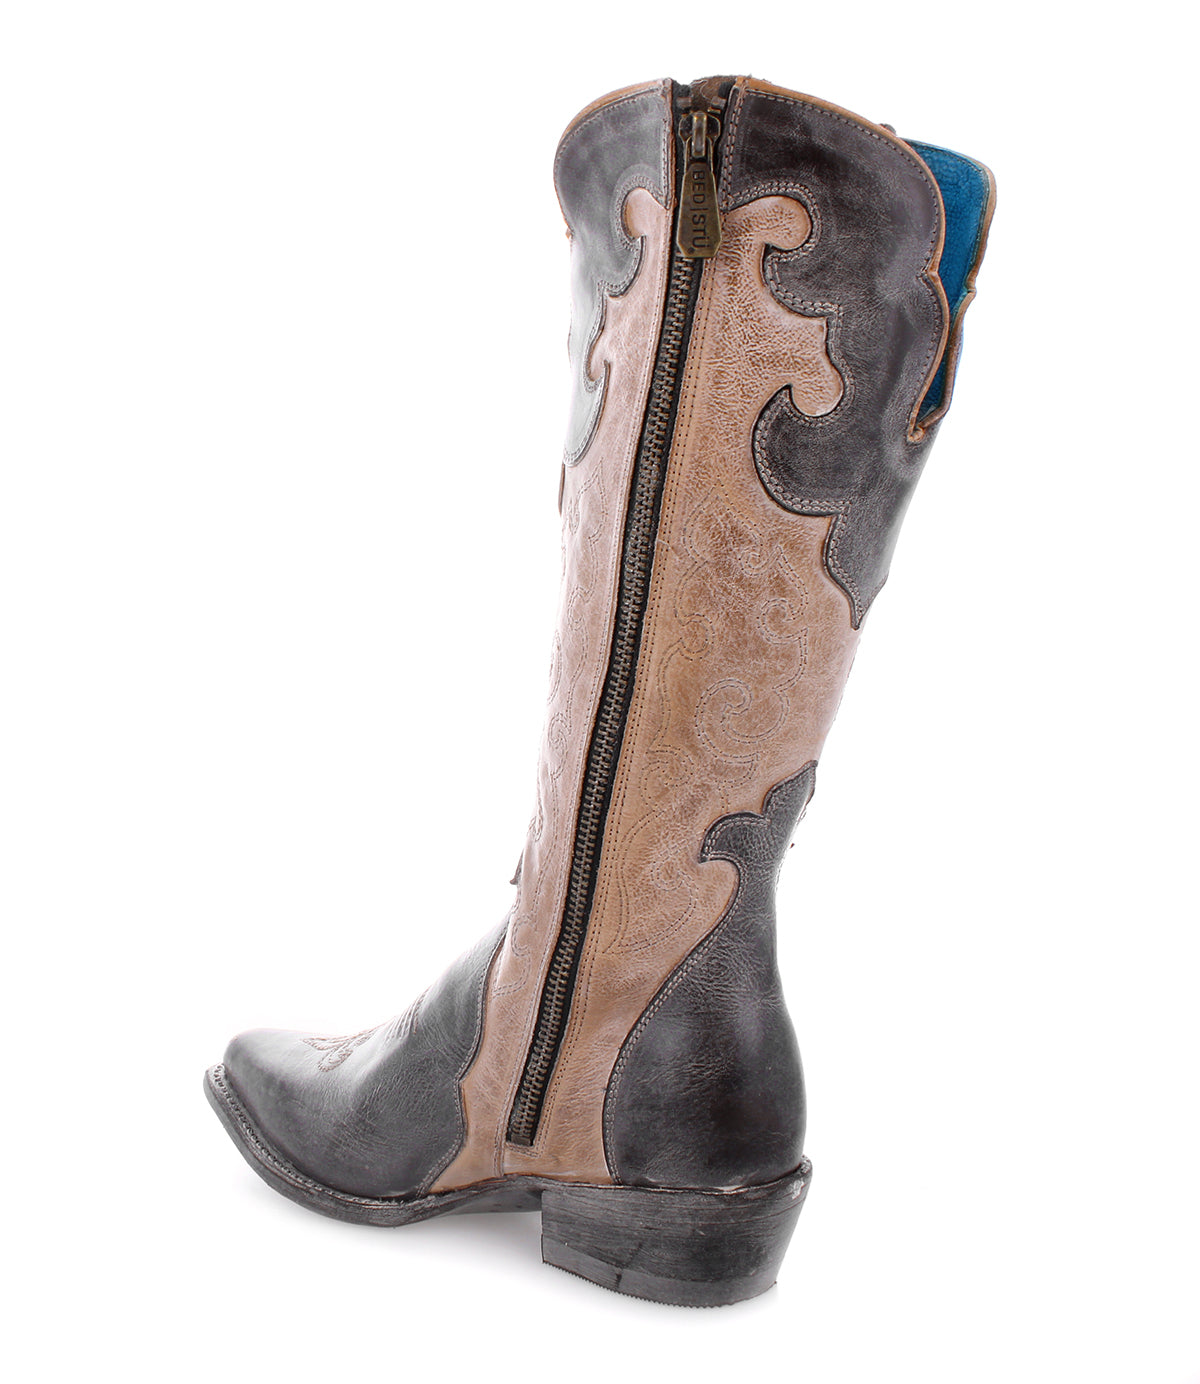 A tall women's cowboy boot with western-style tan and blue accents, called "Queen" made by Bed Stu.